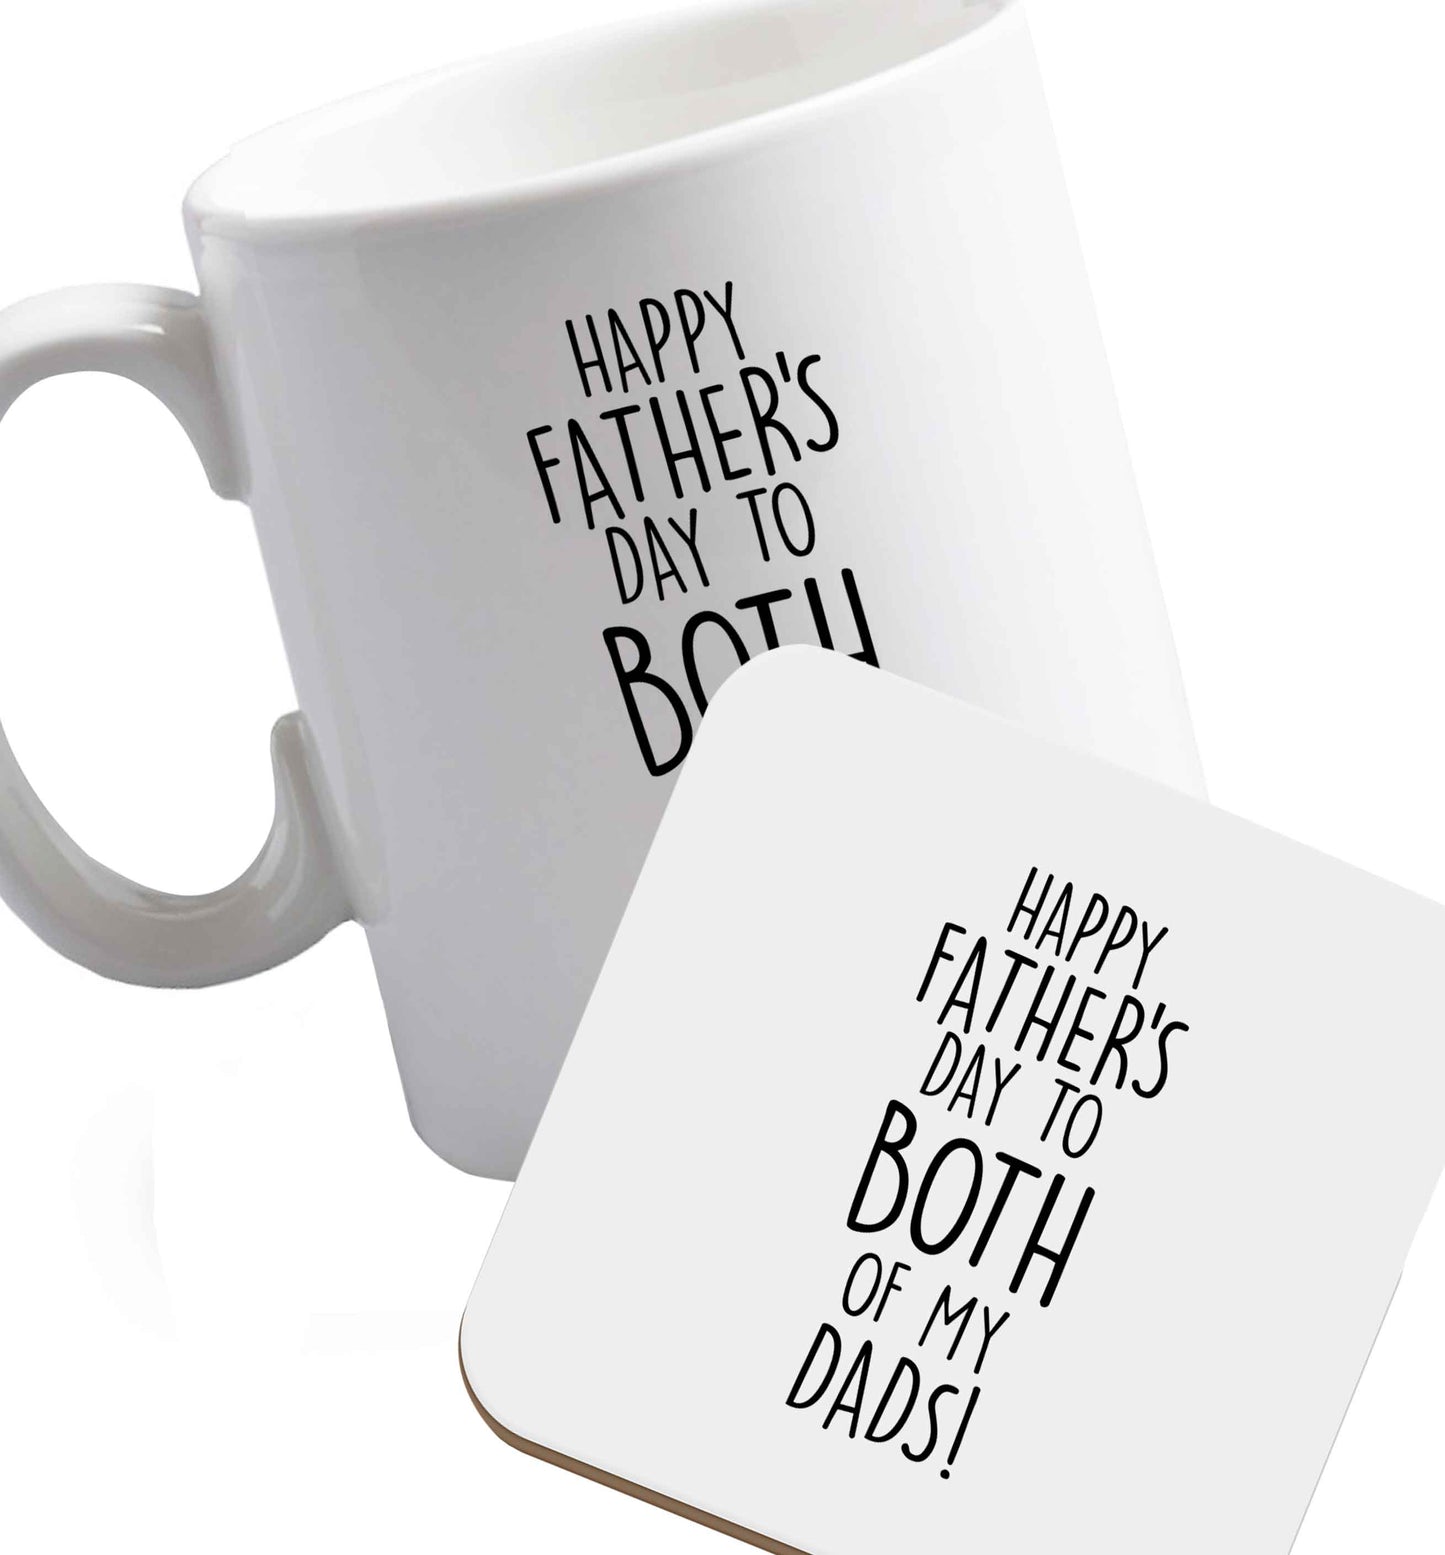 Happy Father's day to both of my dads | Ceramic Mug